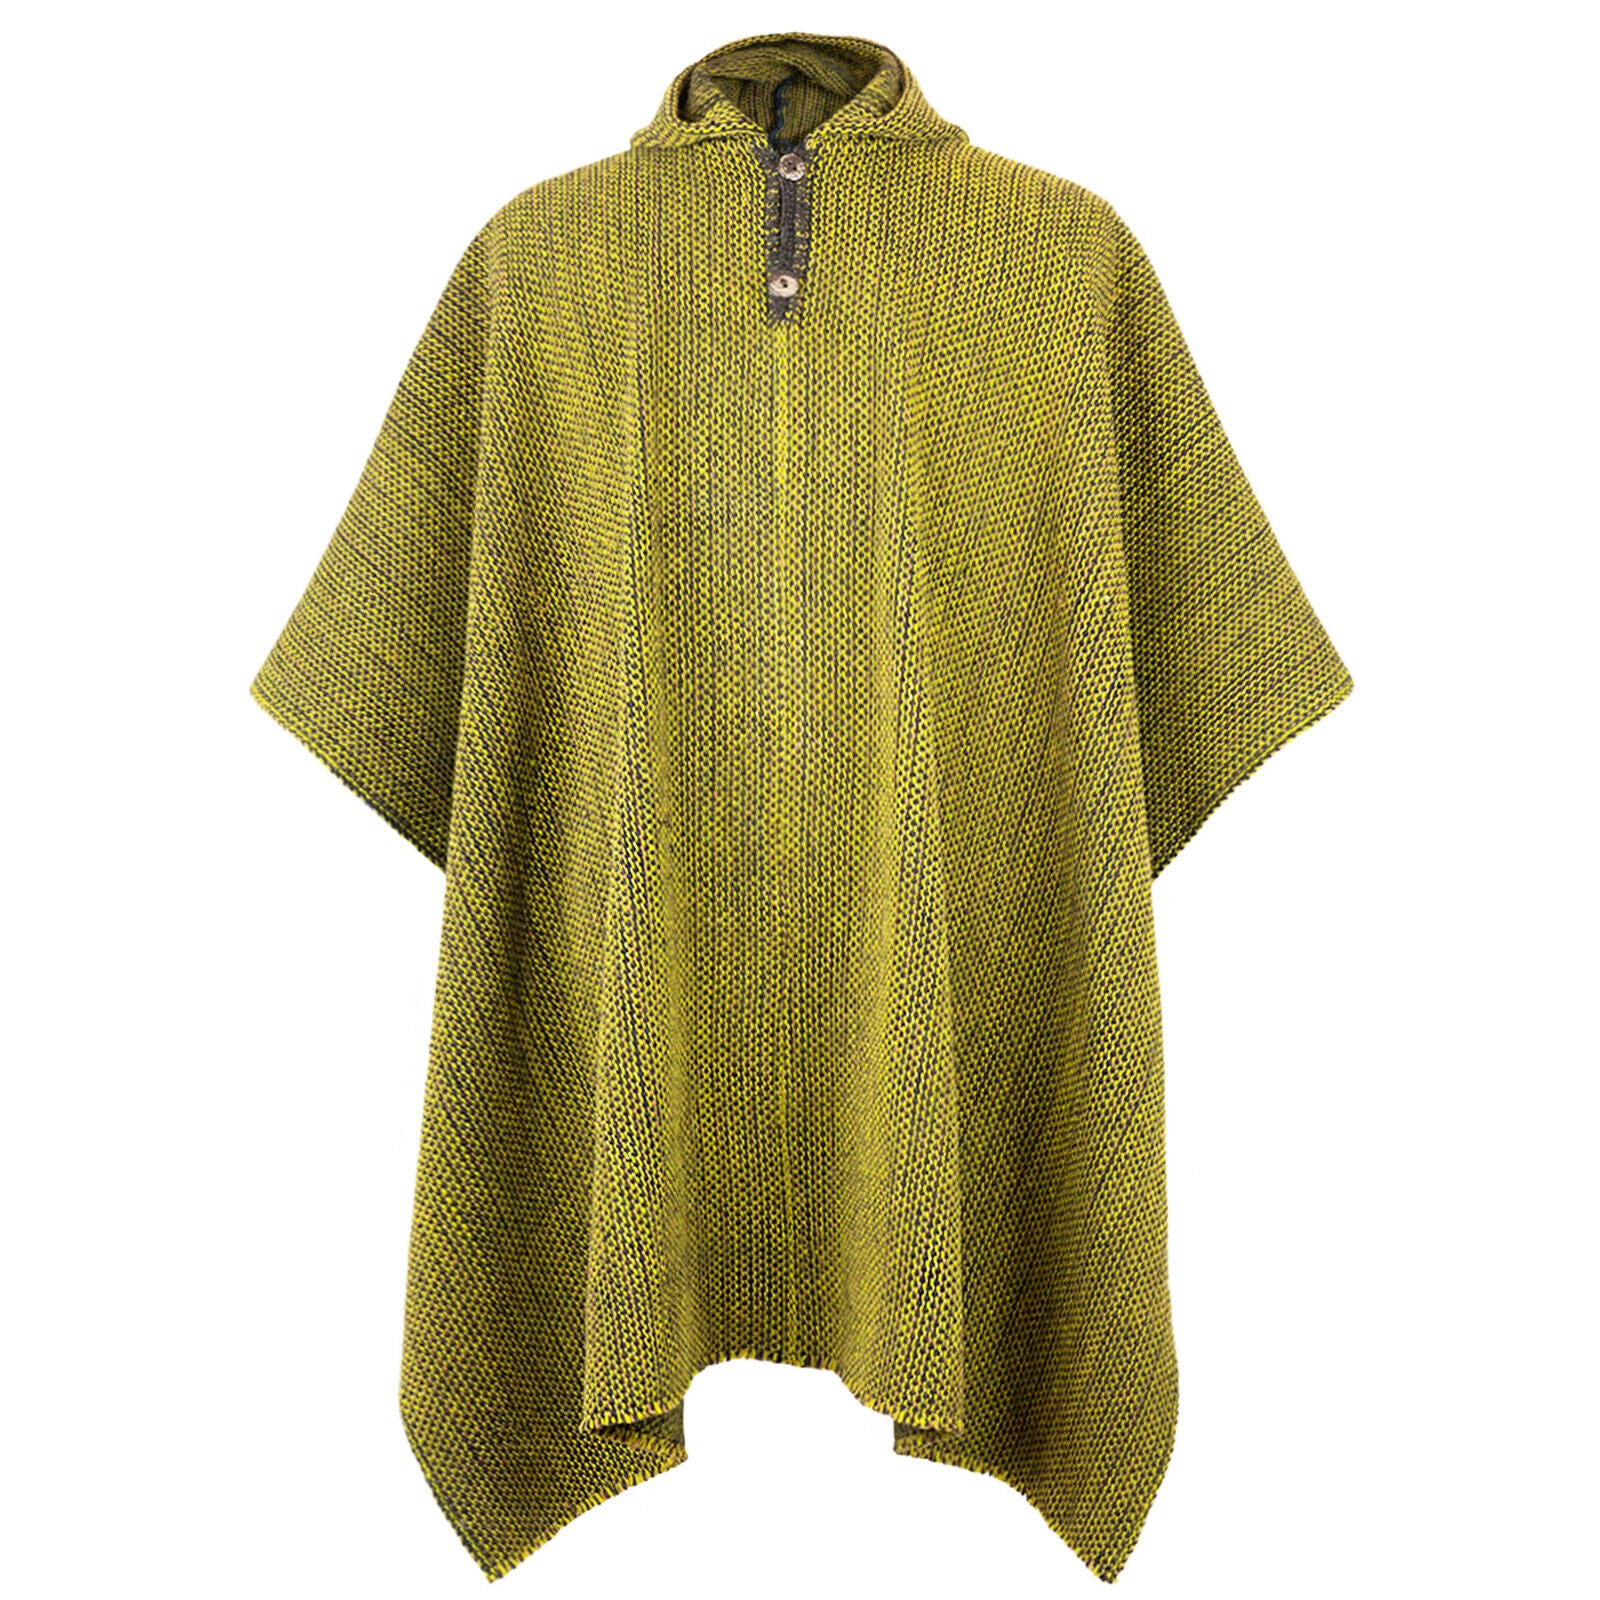 Cangochara - Llama Wool Unisex South American Handwoven Thick Hooded Poncho - solid light green/camo pattern